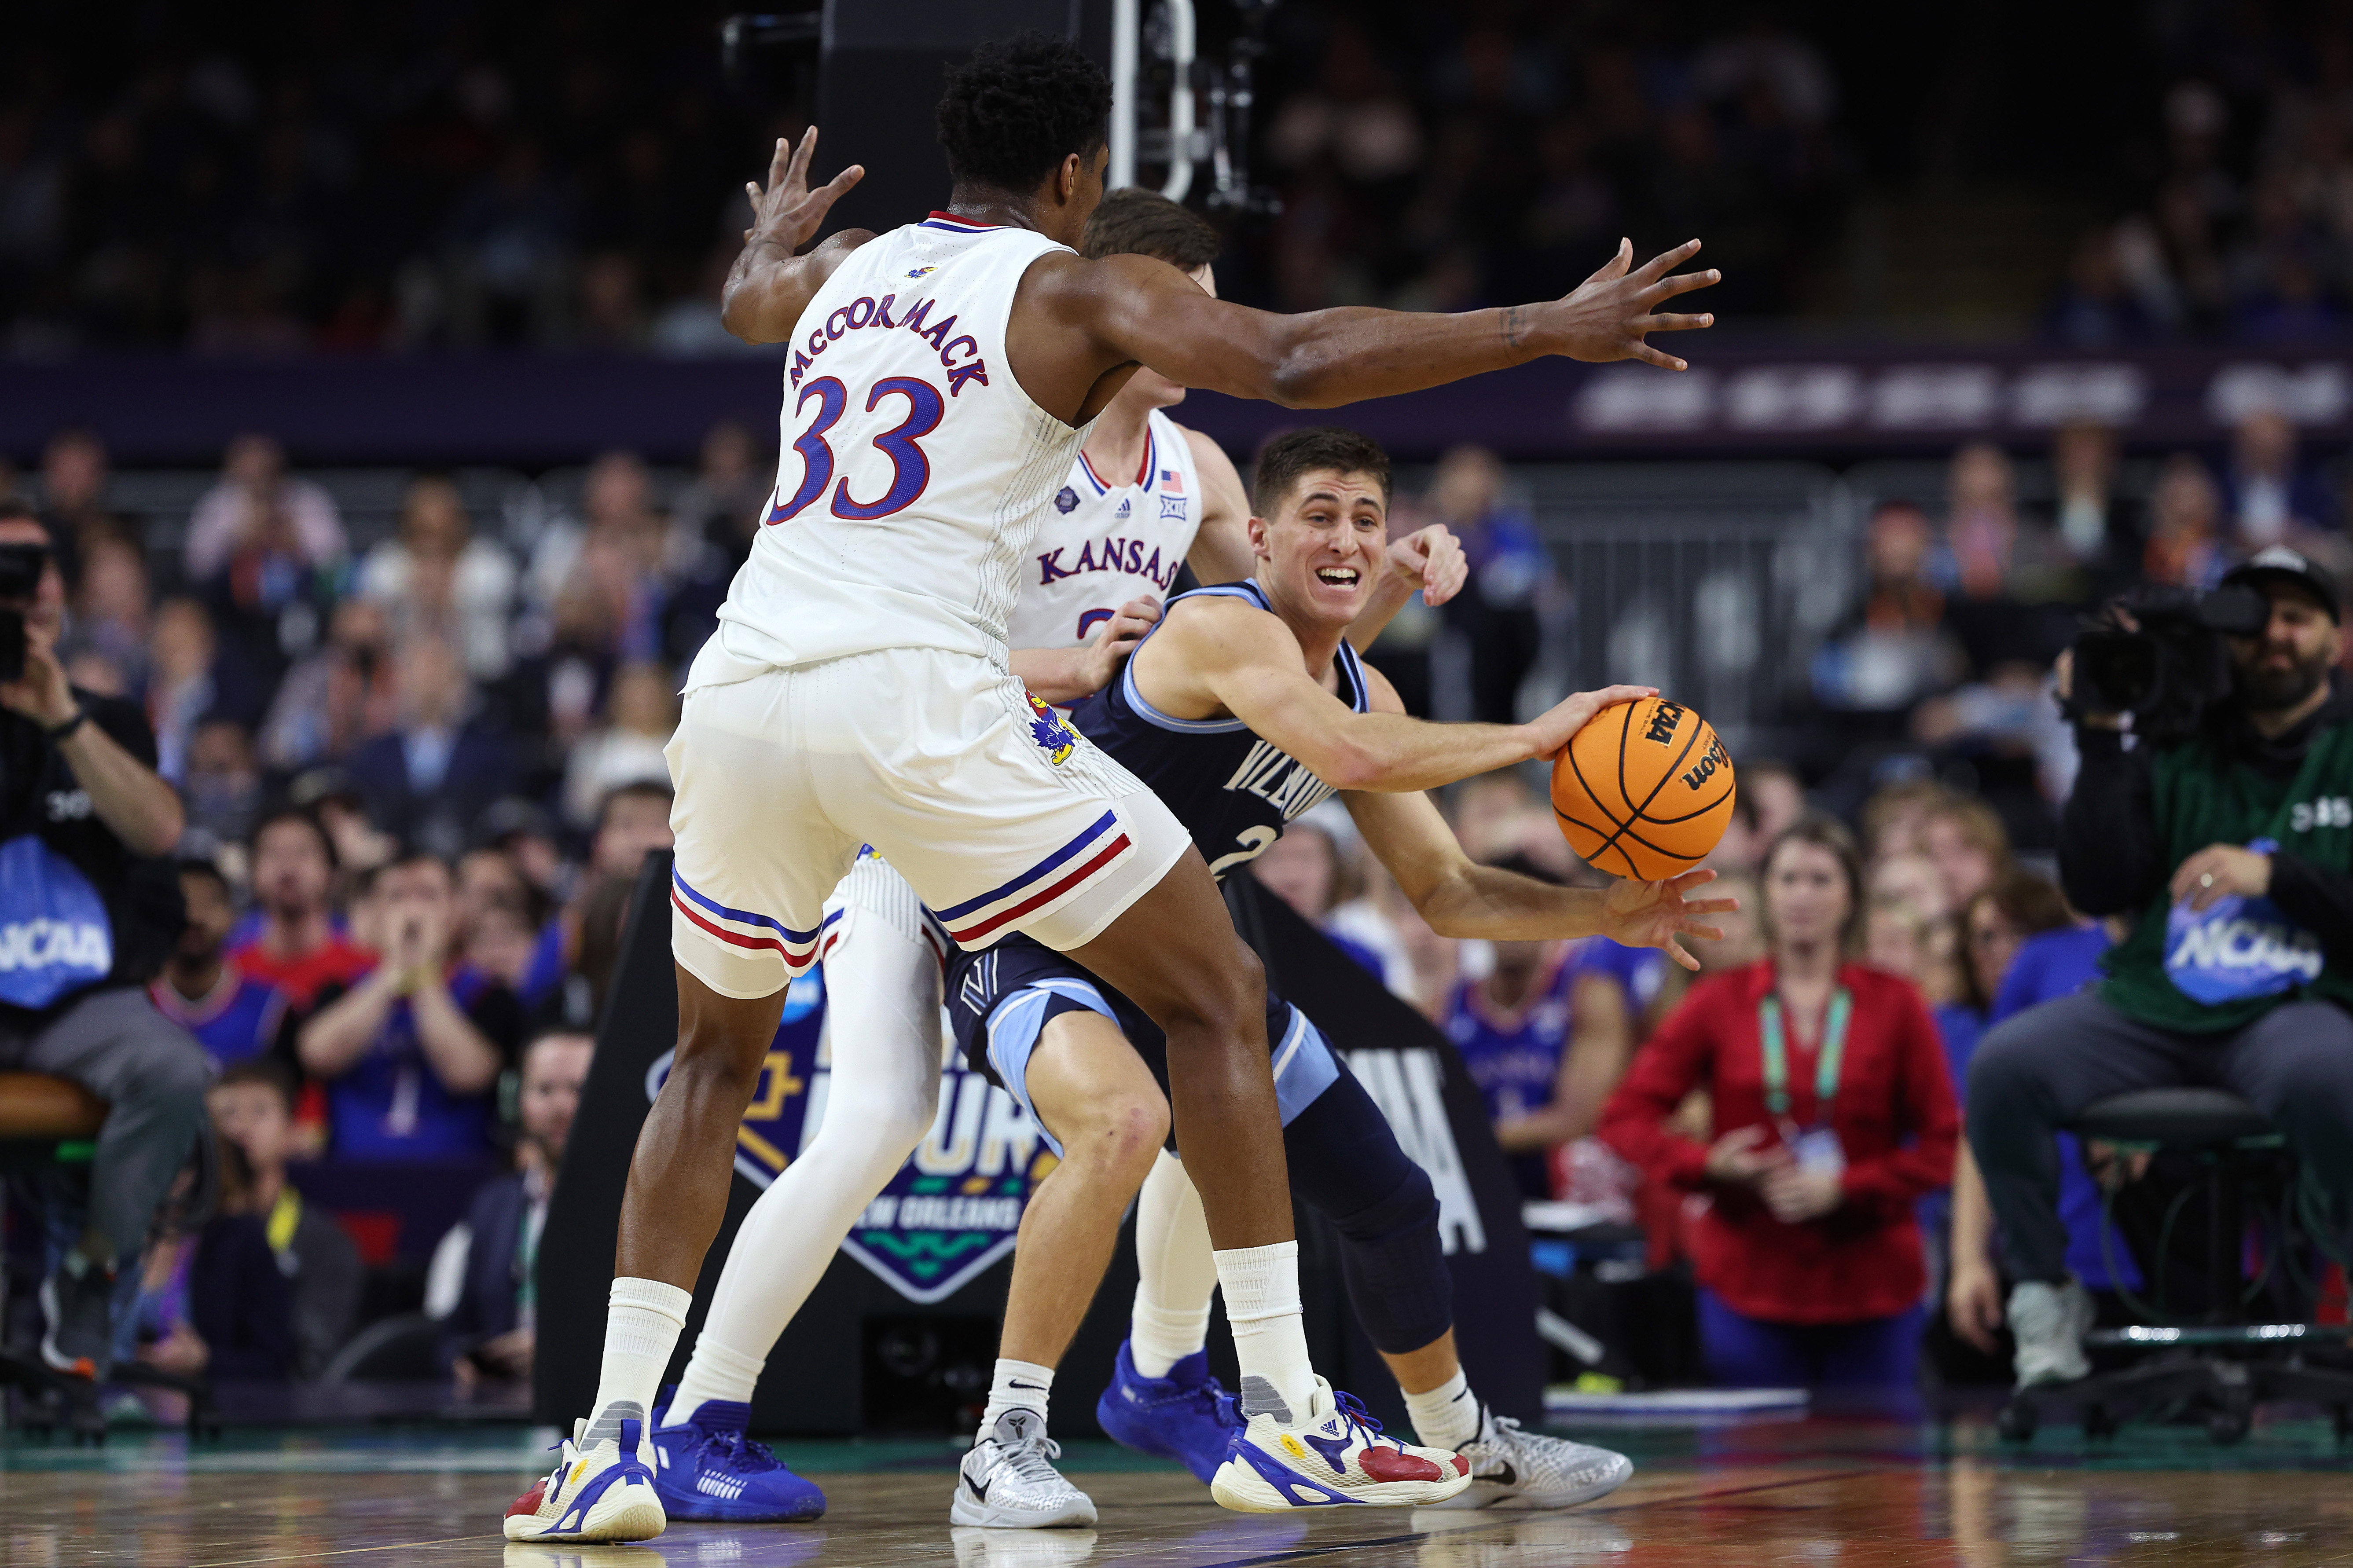 Top-seeded Kansas earns a berth in NCAA national championship game with a Final Four triumph over Villanova